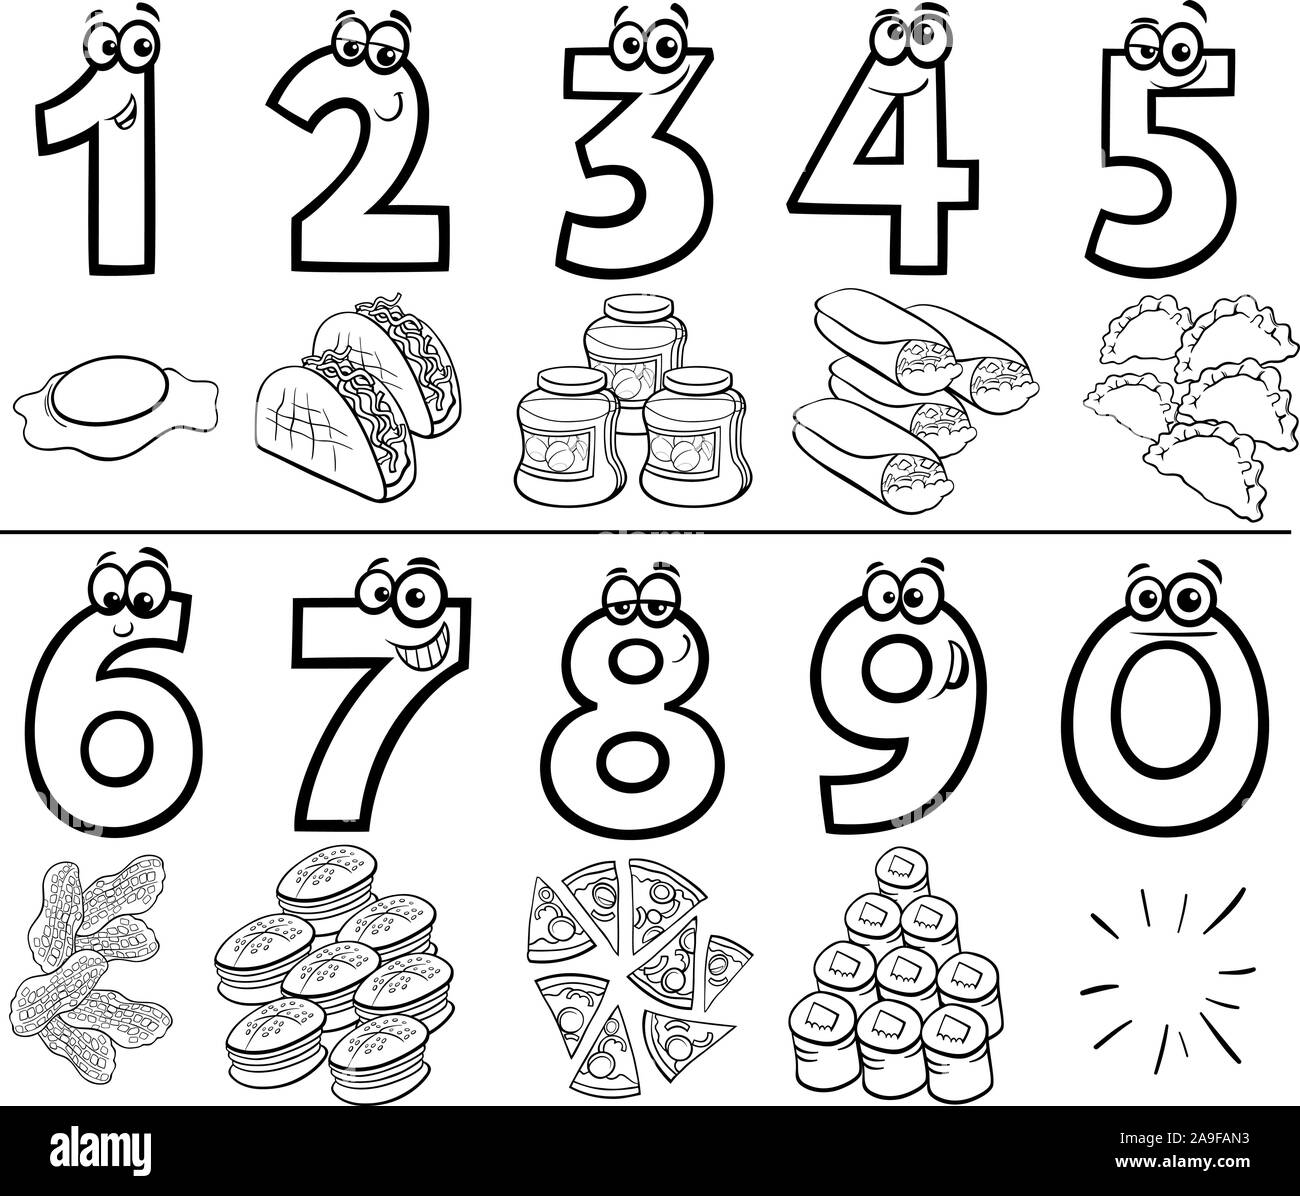 Black and White Cartoon Illustration of Educational Numbers Collection from One to Nine with Food Objects Coloring Book Stock Vector